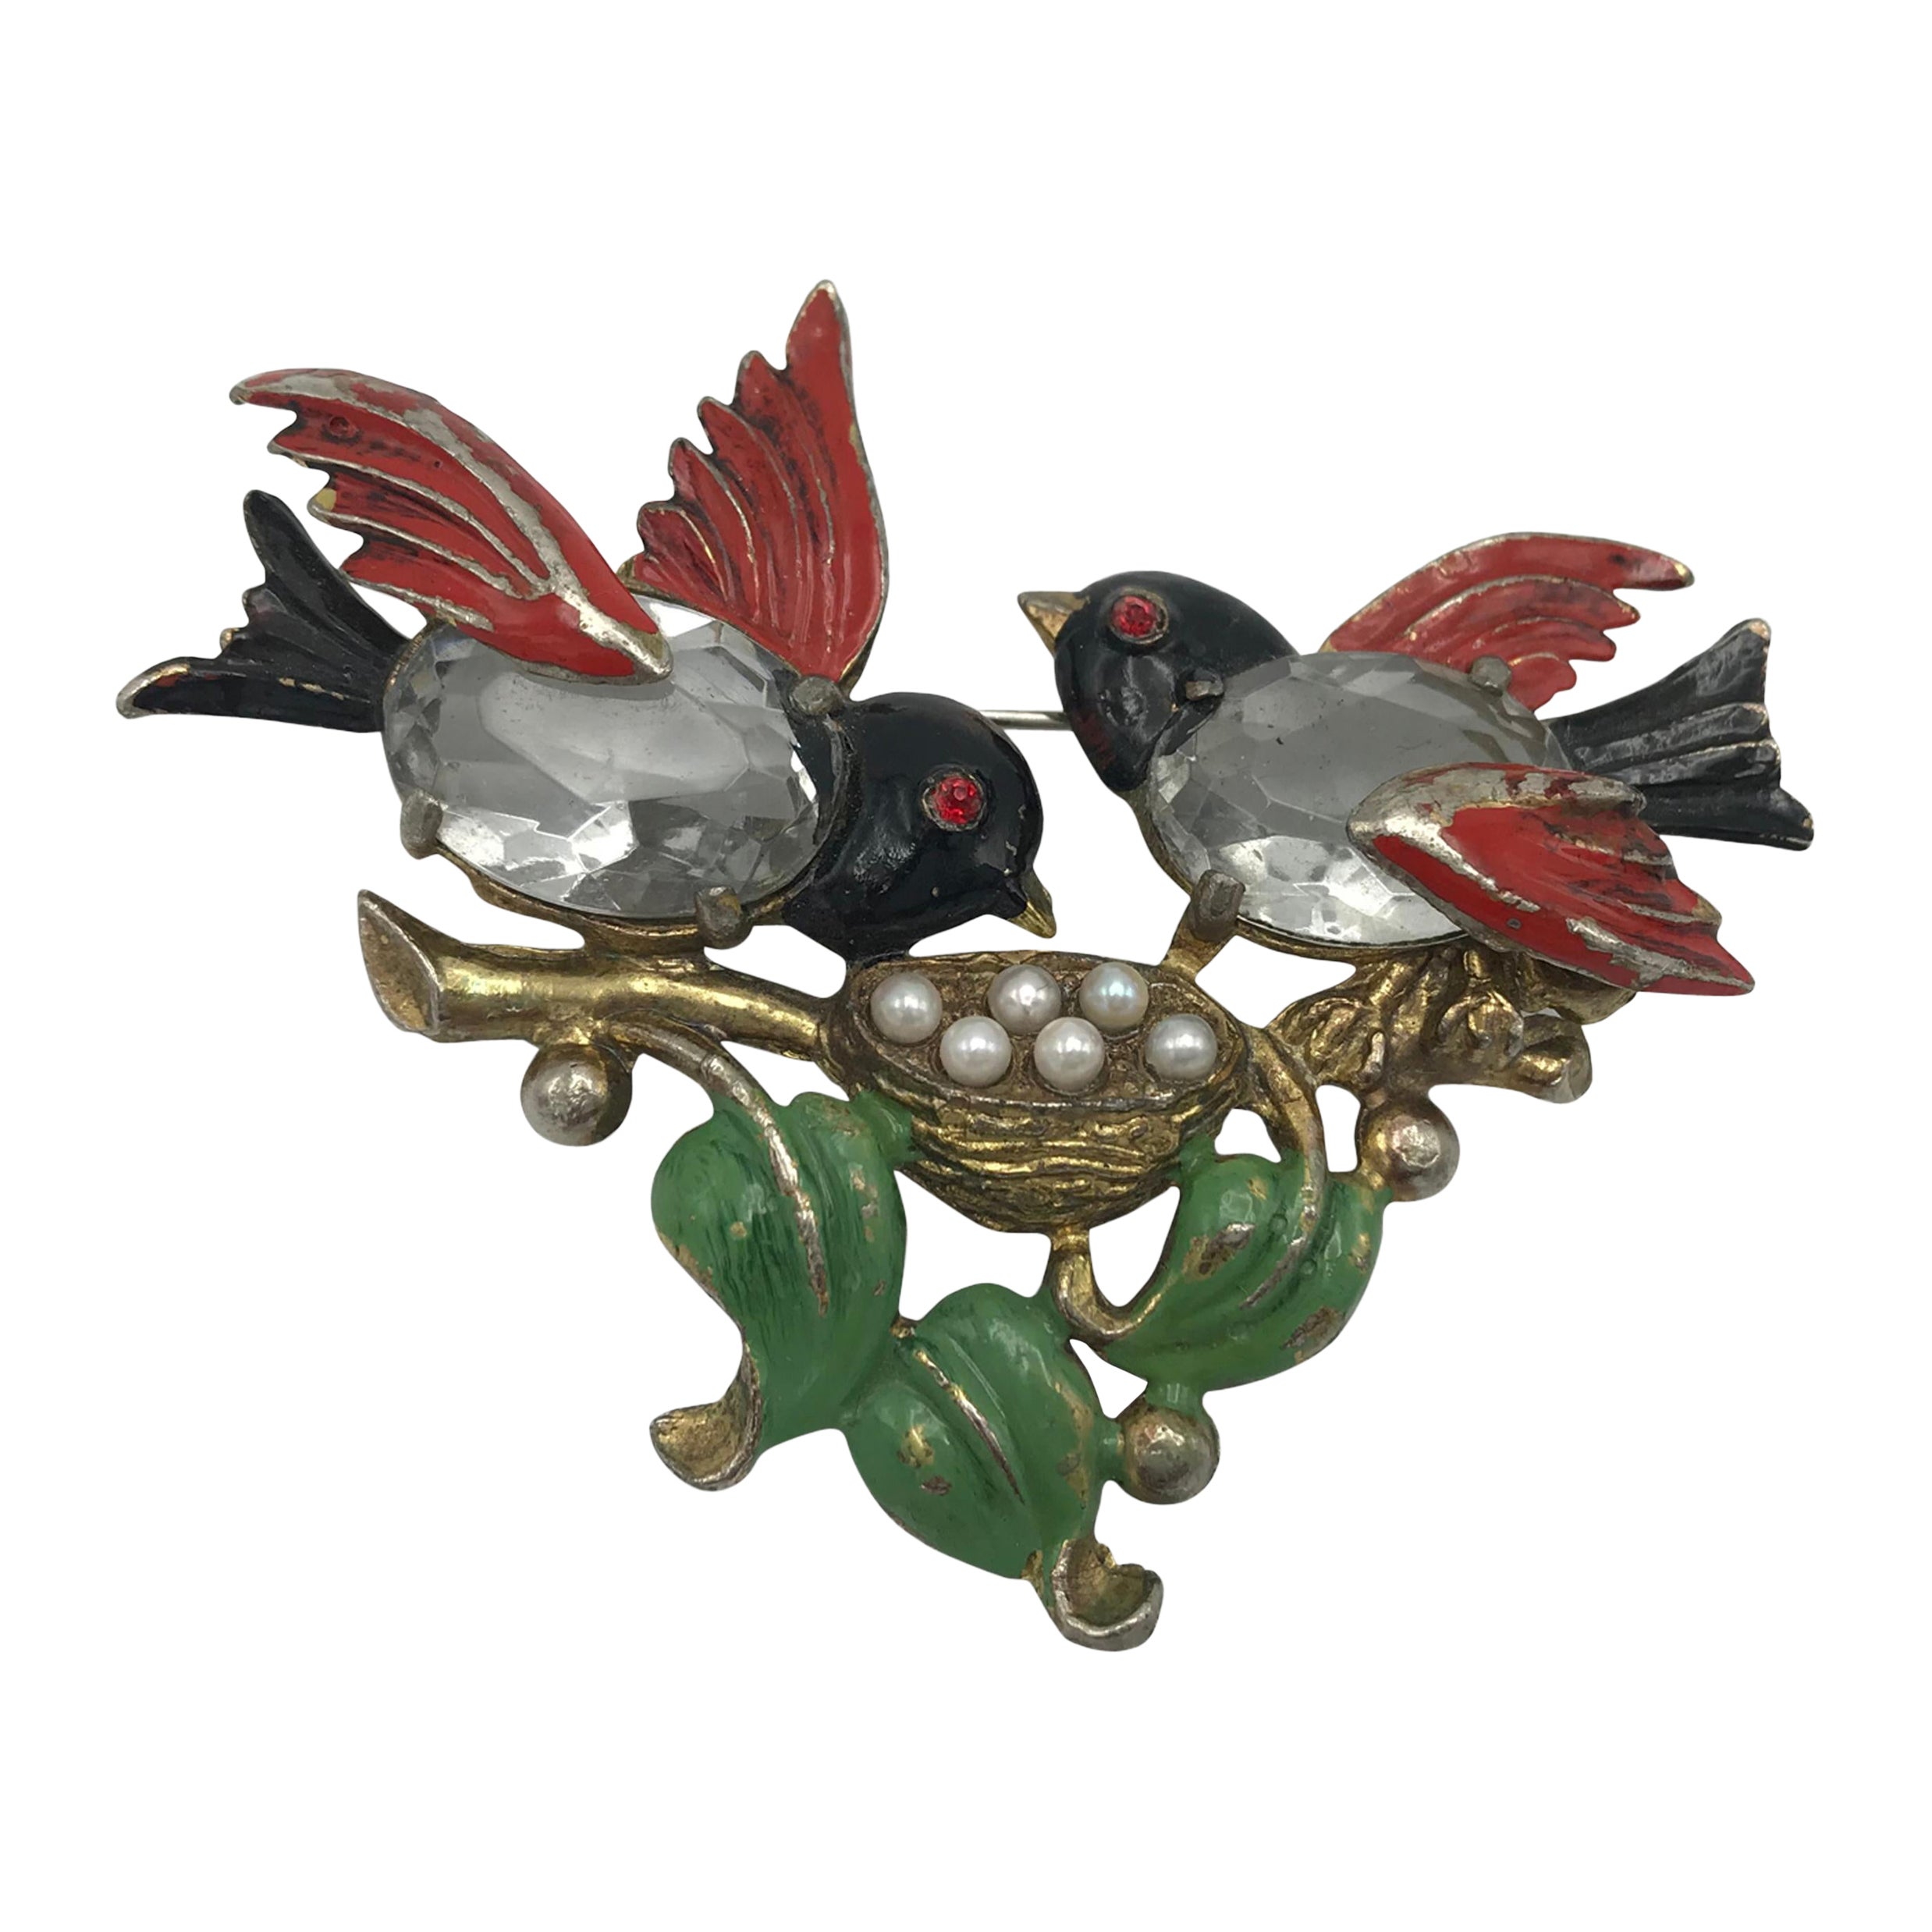 A lovable brooch with 2 birds that take care of their treasure together!
The parents of the birds sit on a branch and take care of their eggs. The bodies of the 2 birds are made of 2 polished rhinestones, the wings, head and tails and the leaves are